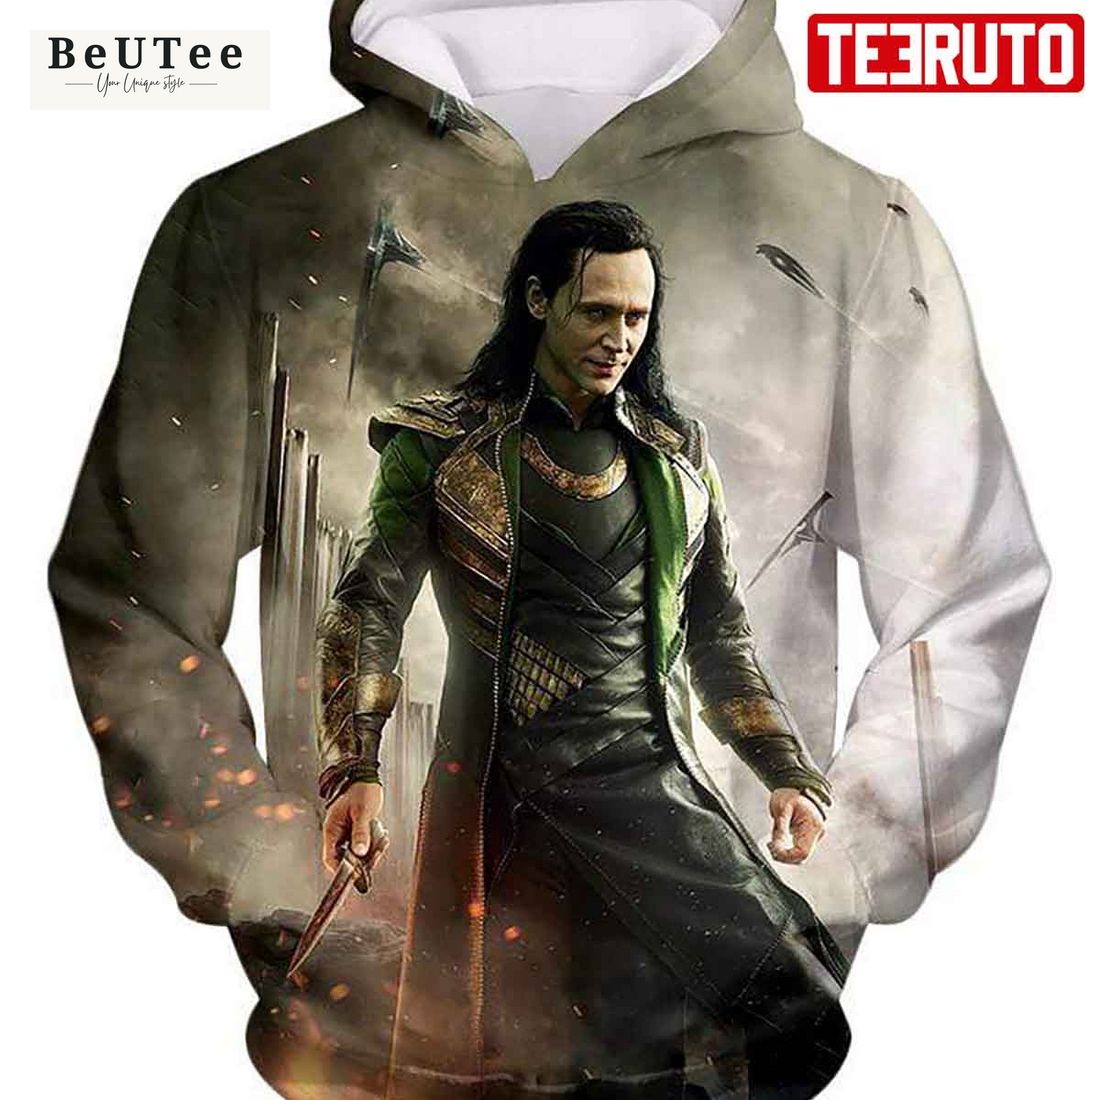 marvels mind controlling villain loki graphic action hd 3d aop hoodie 1 xHoku